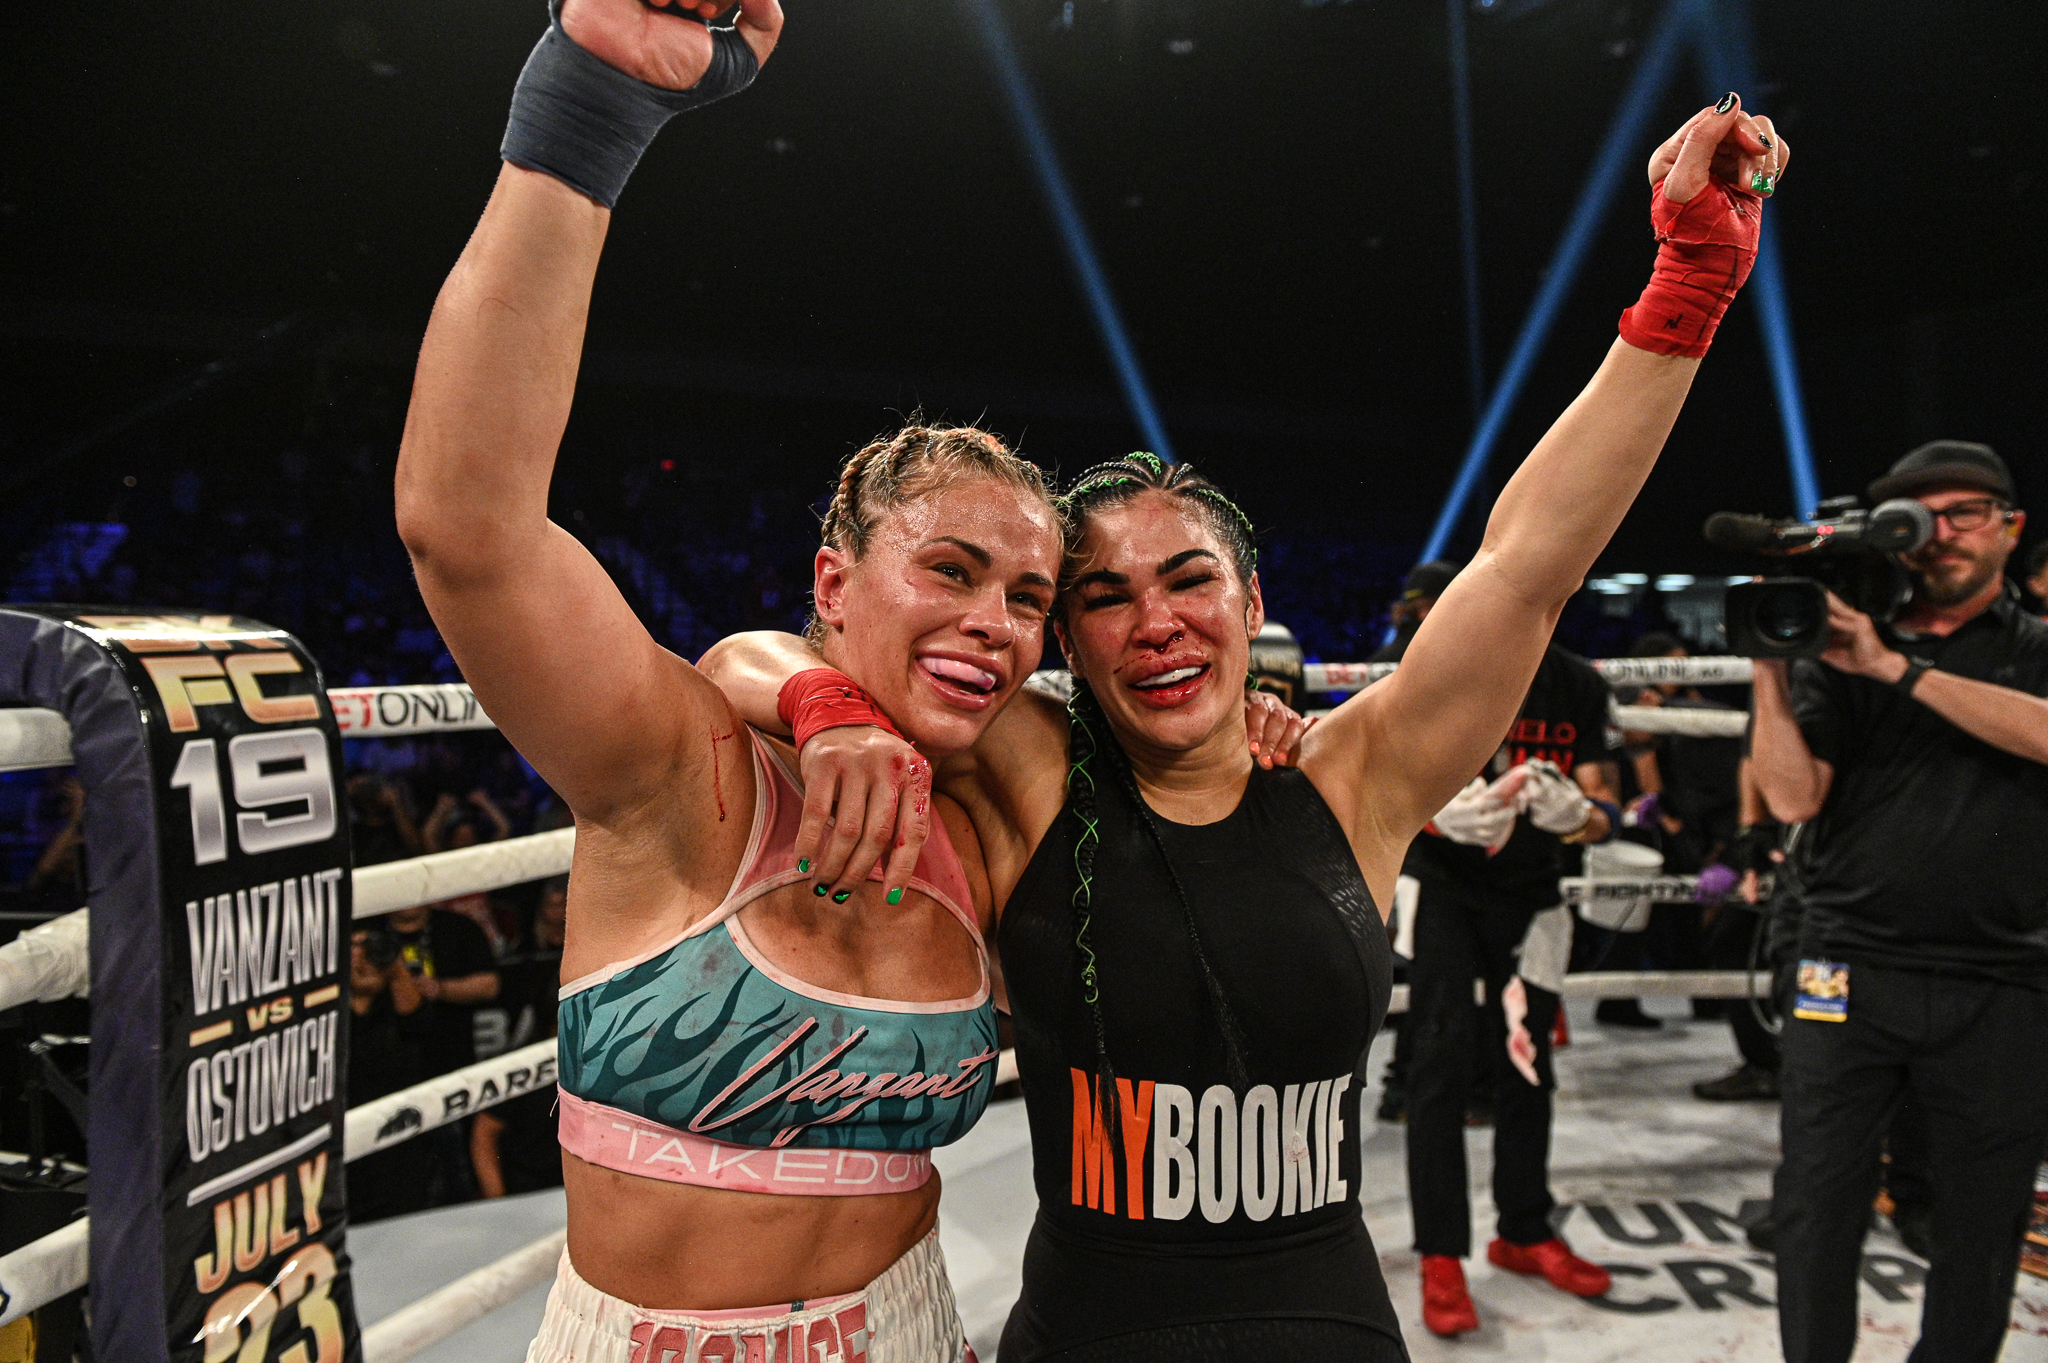 Rachael Ostovich on BKFC 19 debut win over Paige VanZant: “I really was having a damn good time in there"